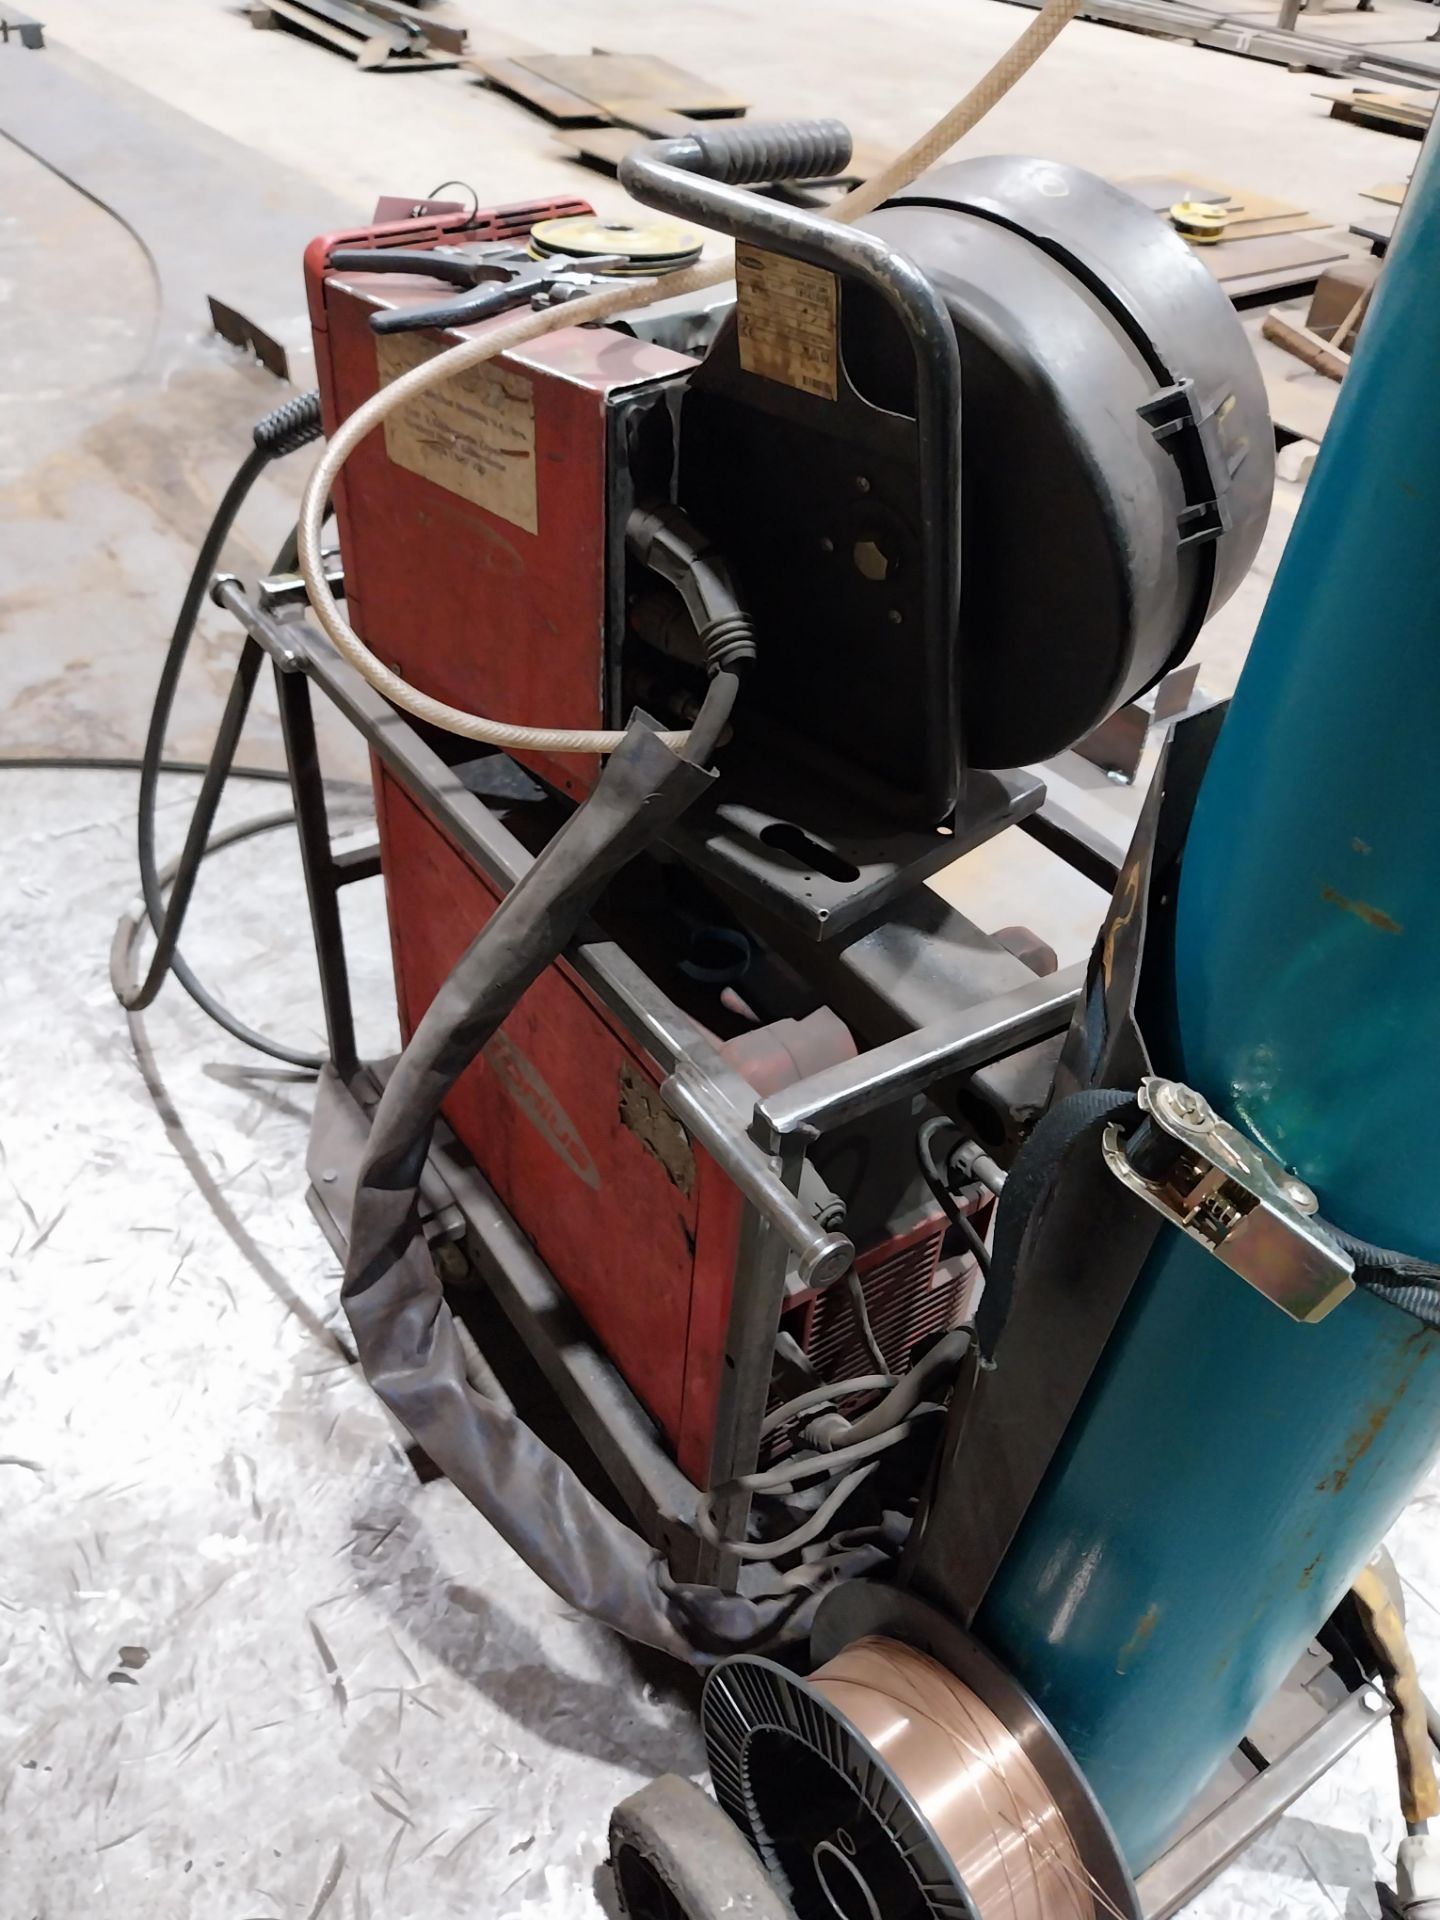 Fronius VR4000 4R/G/W/E mig welder with wire feed (bottle not included) - Image 7 of 7